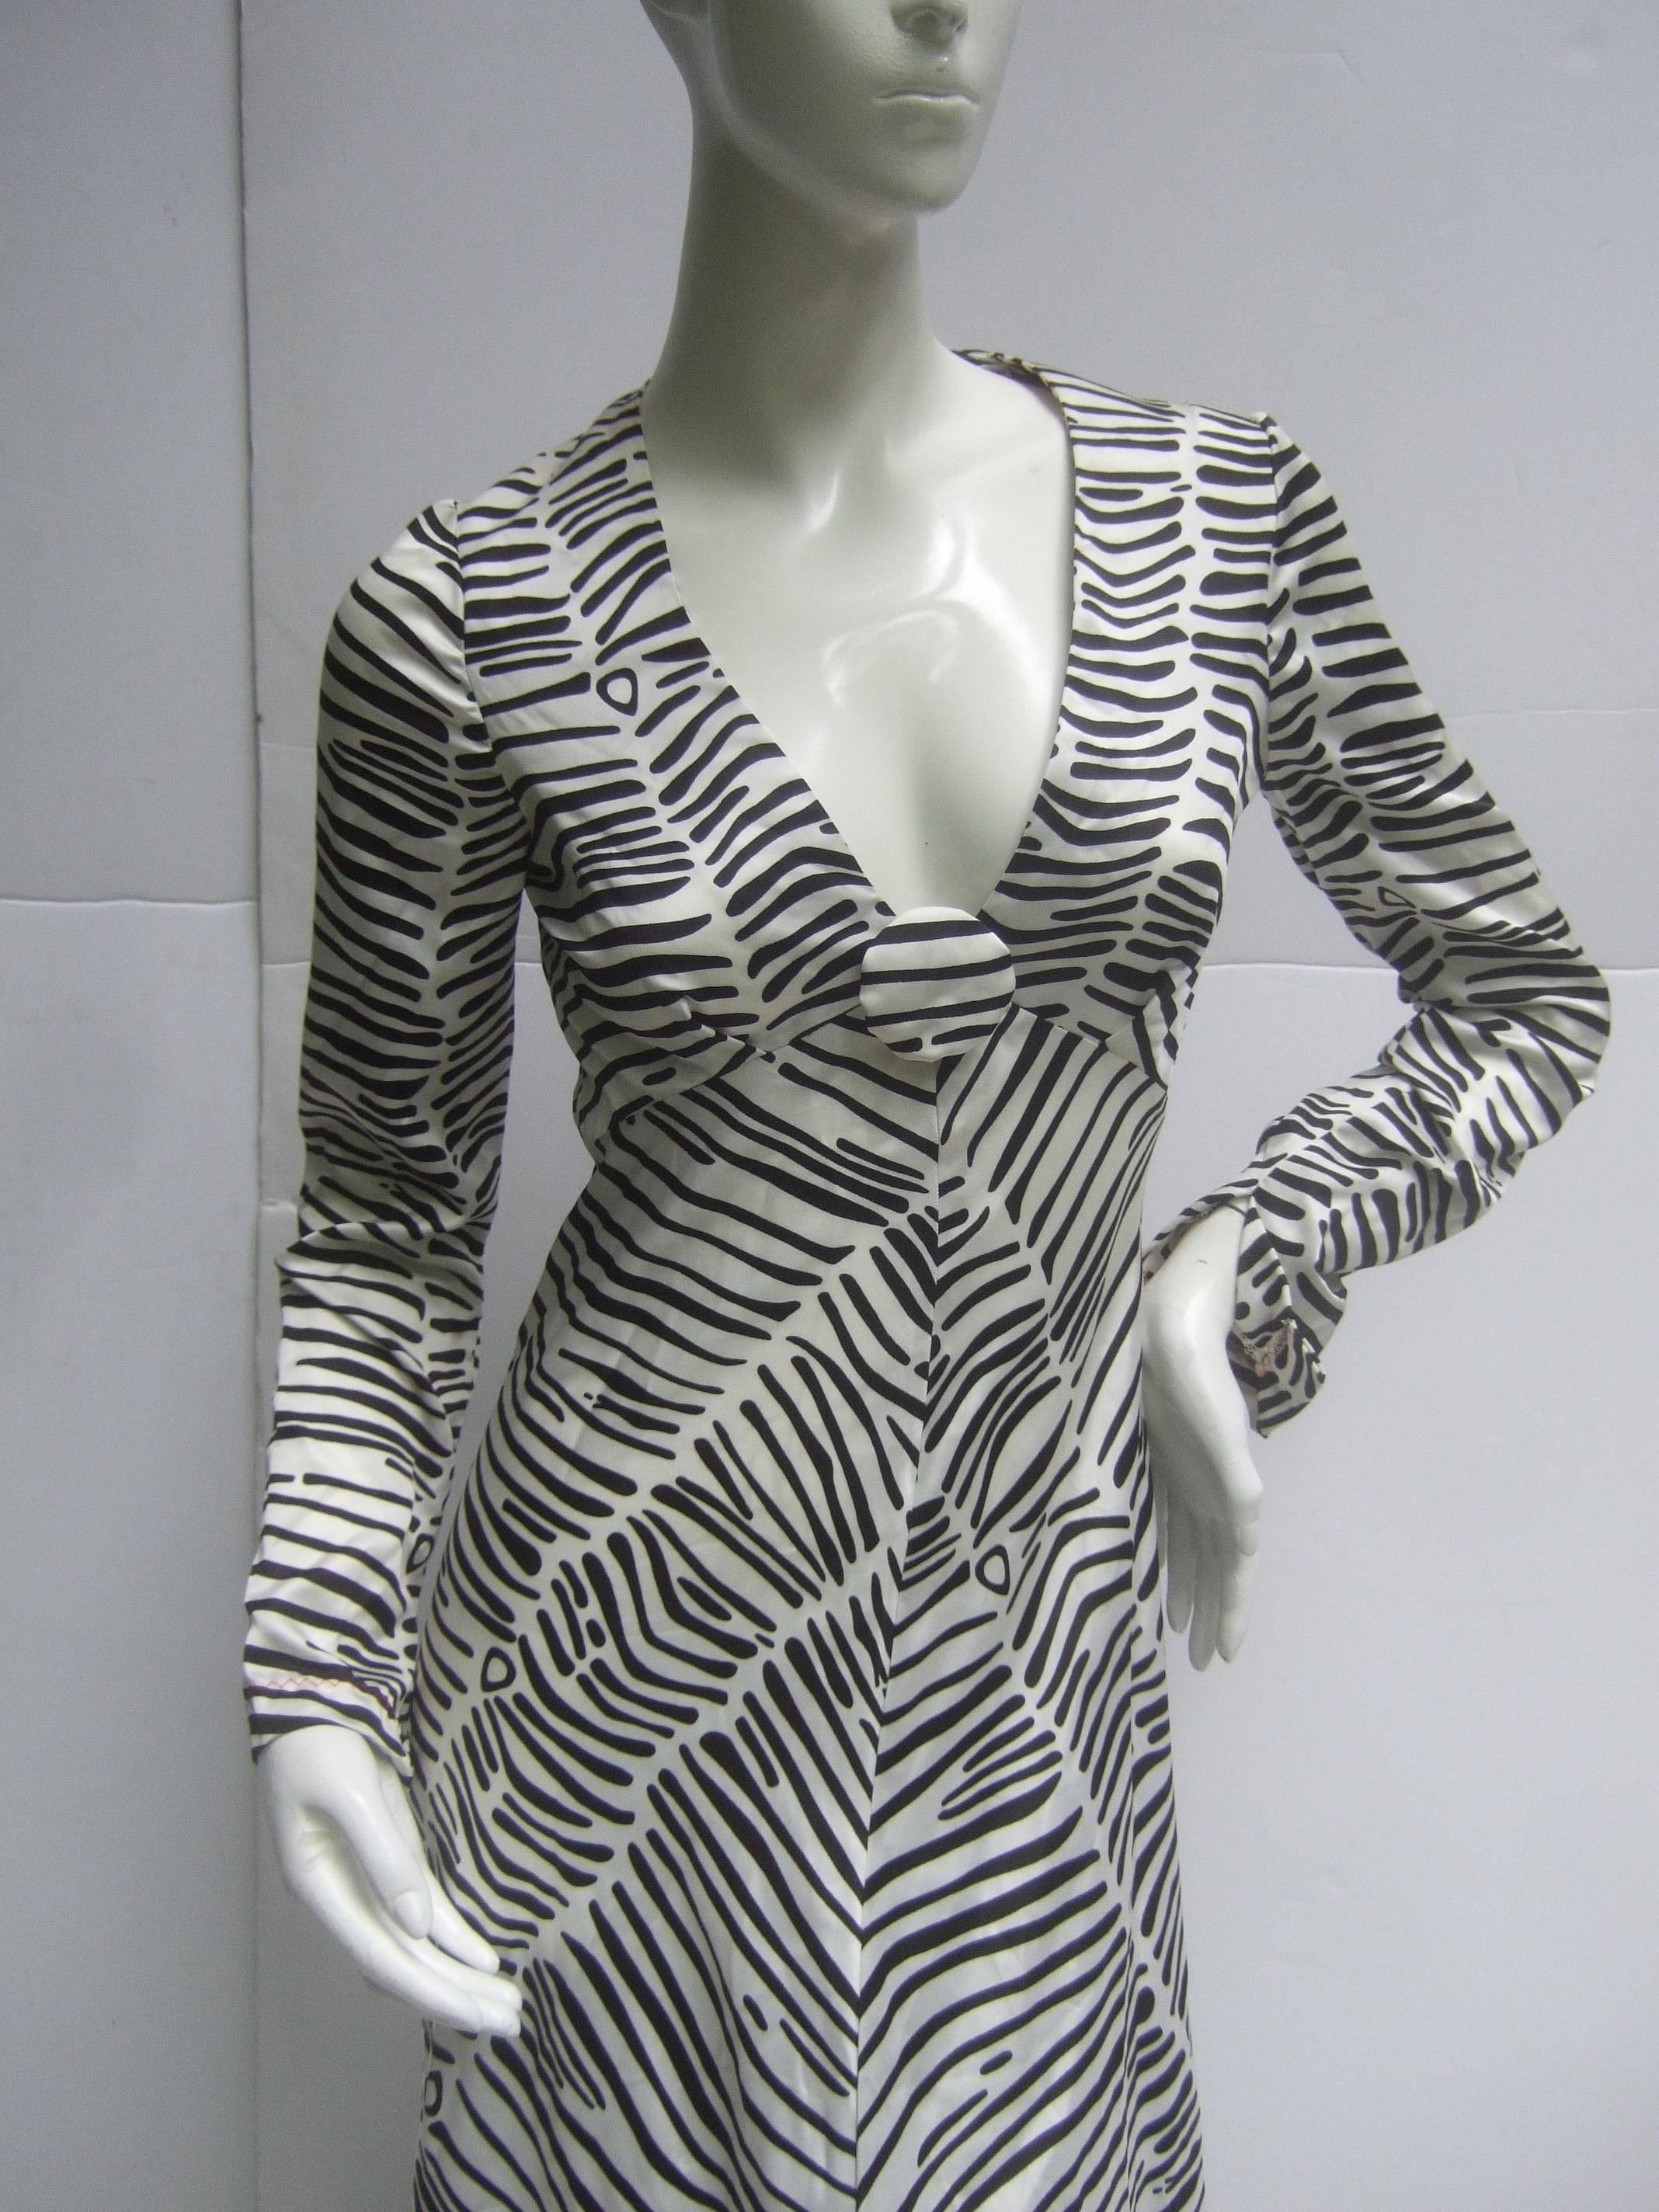 Fabulous Stephen Burrows Silk Gown. 1970's. Georgio of Beverly Hills. 2